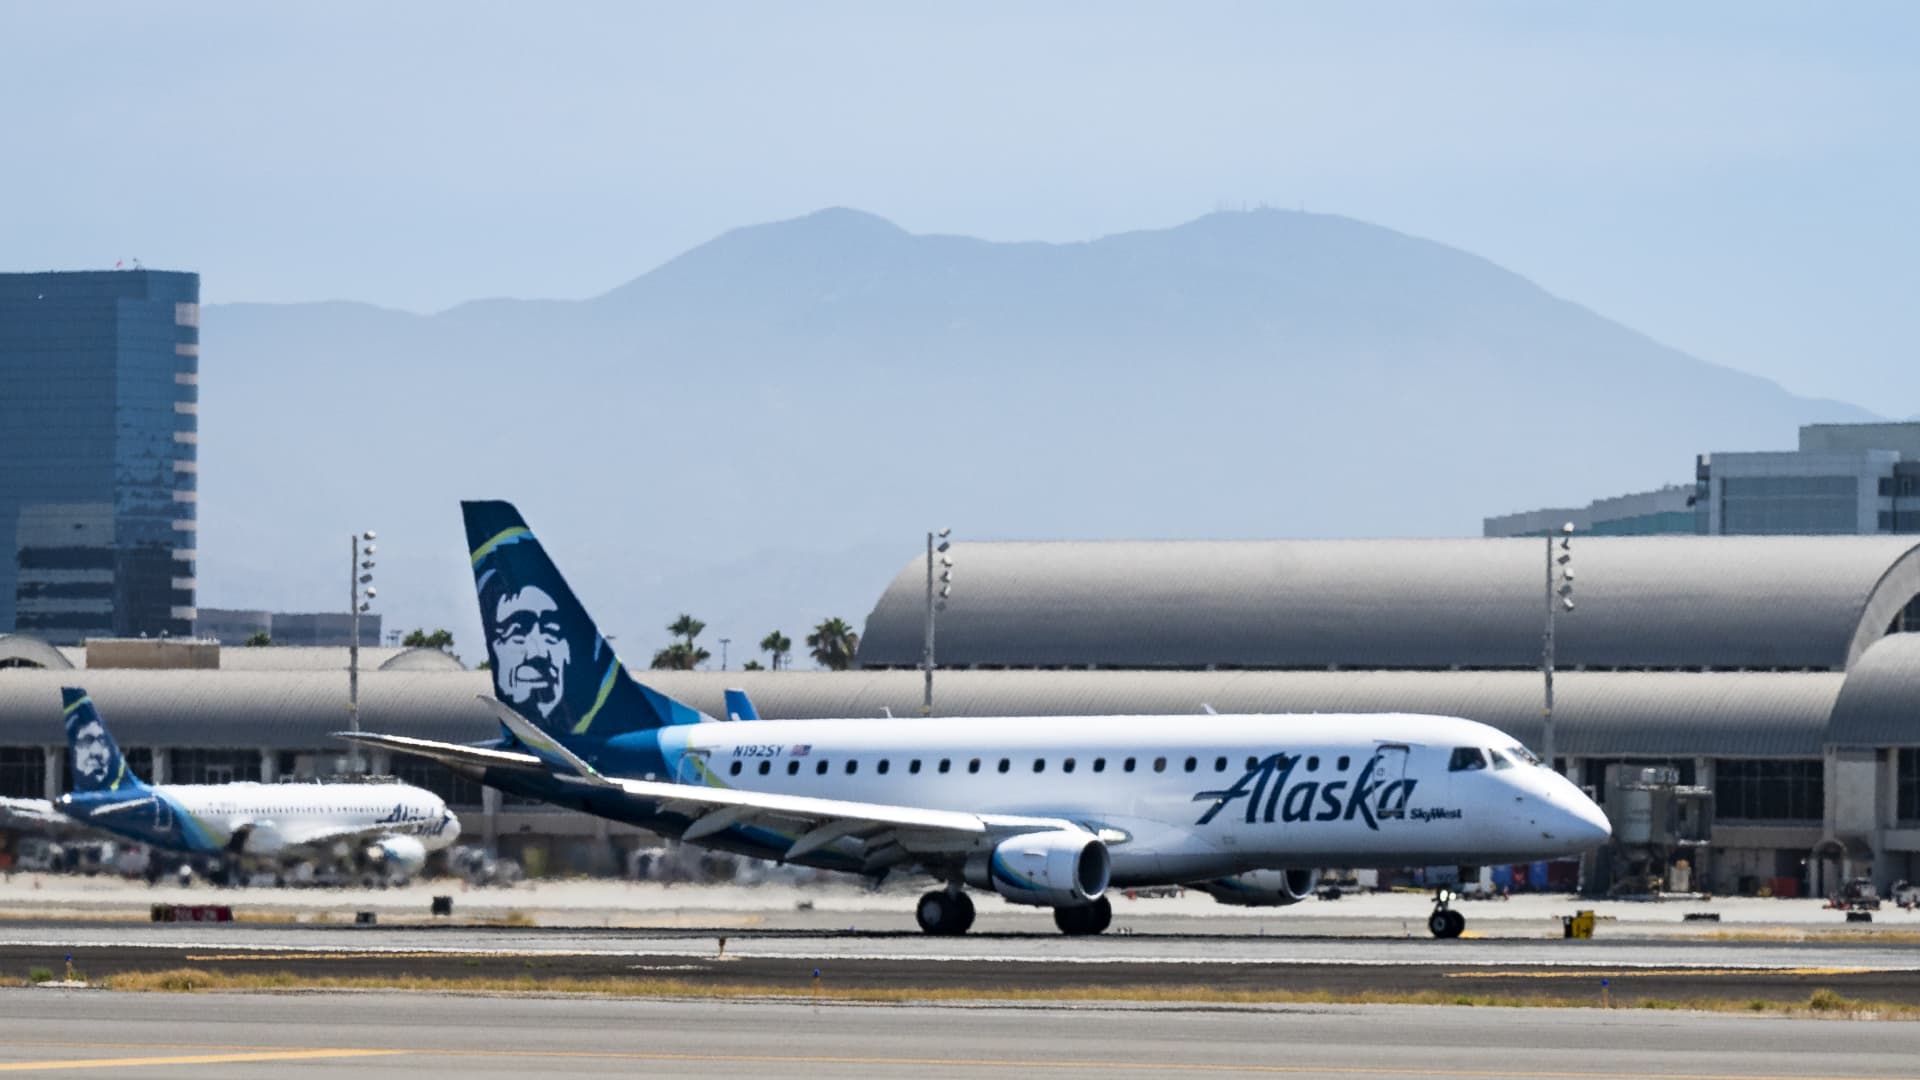 Off-accountability Alaska Airlines pilot warned ‘I’m now not k’ earlier than alleged strive to disable plane engines